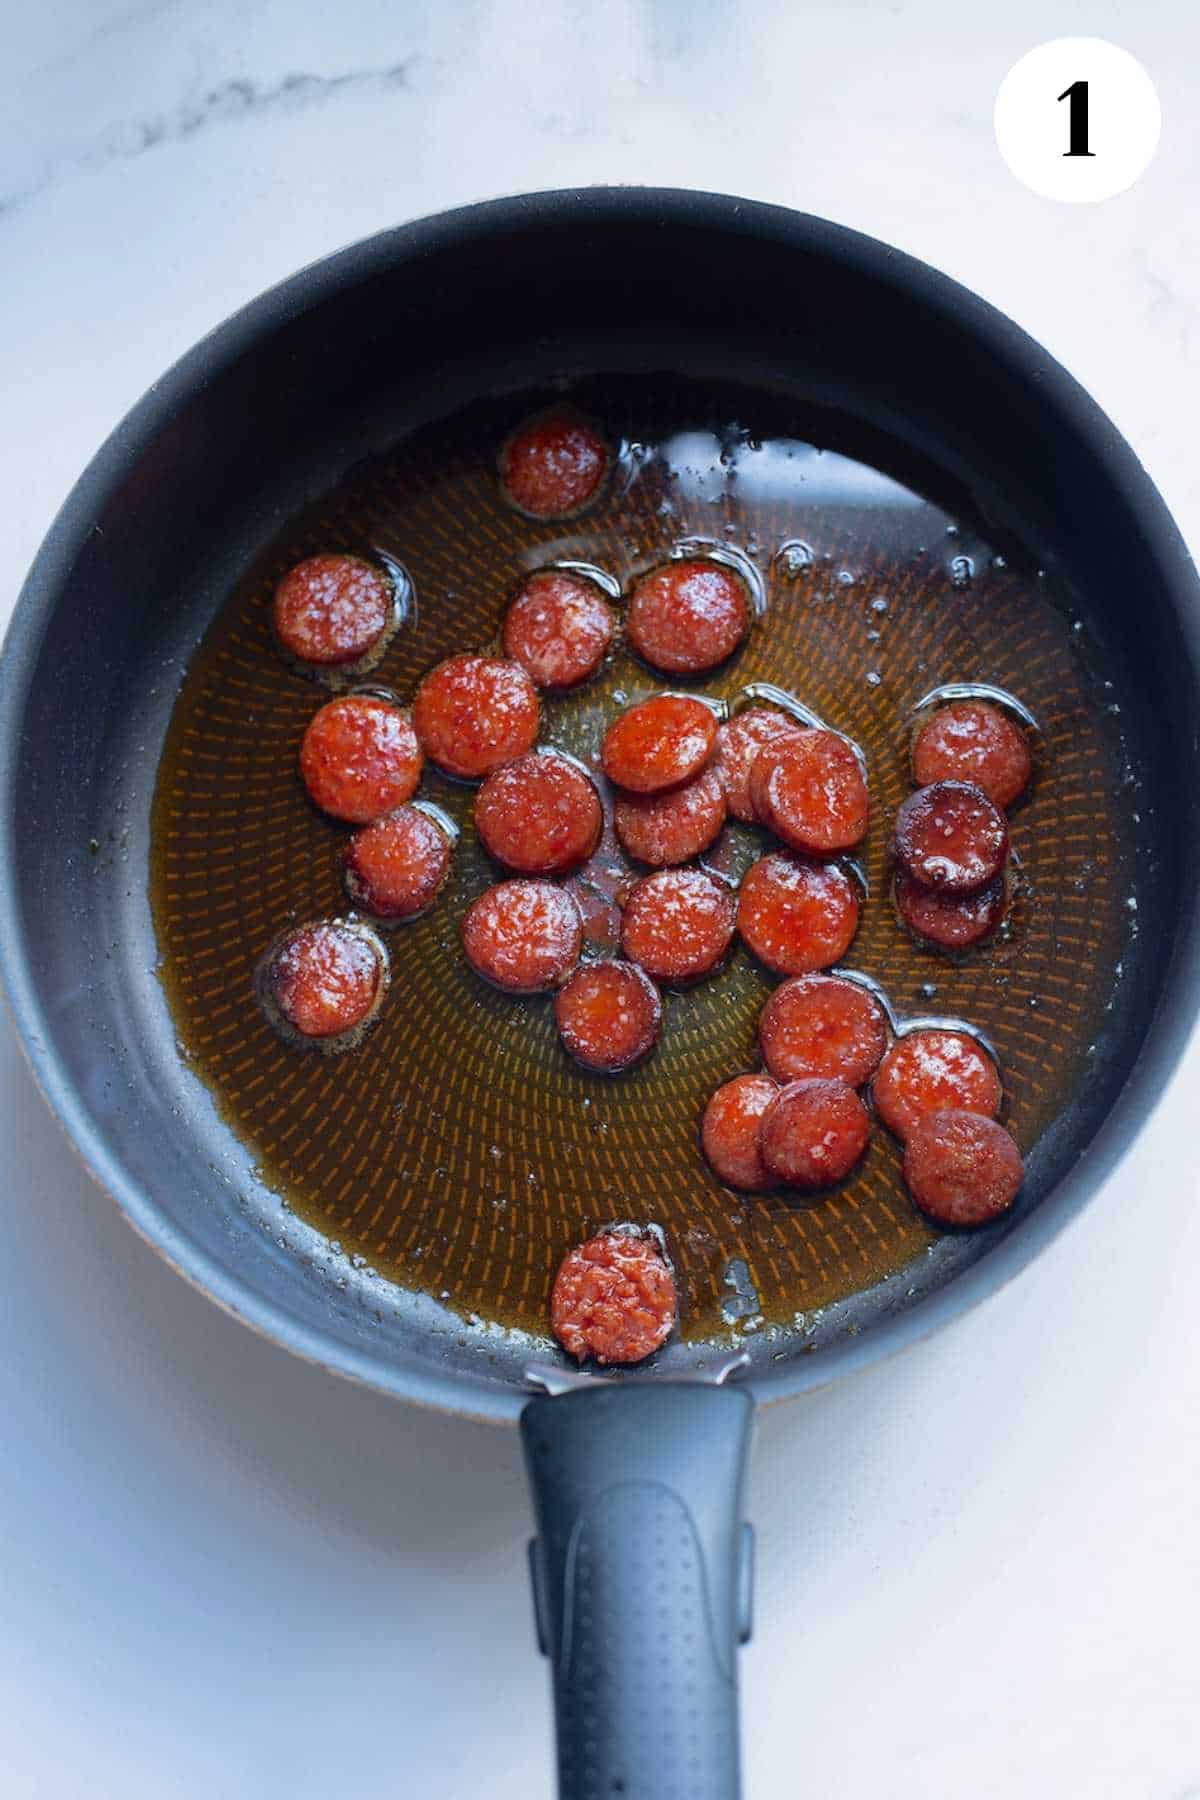 Chorizo browning in a cast iron pan.